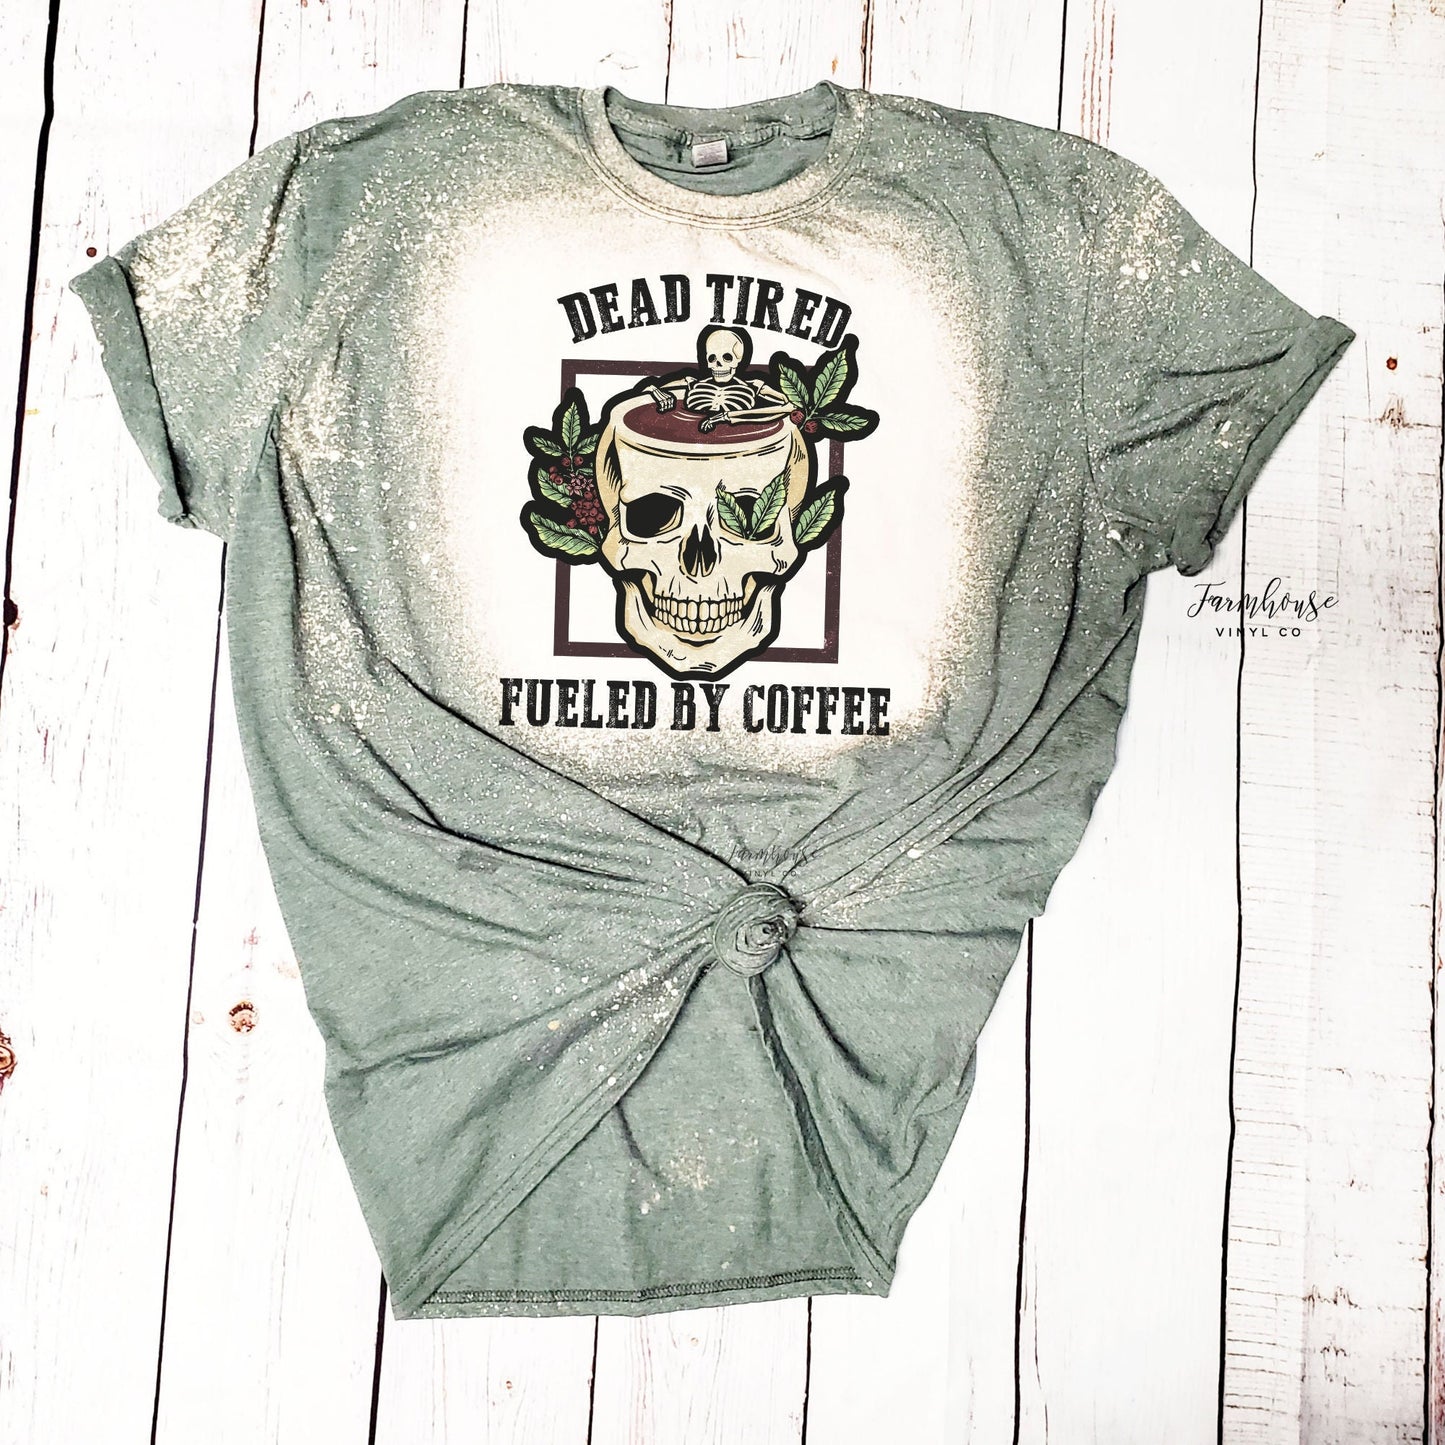 Dead Tired Fueled By Coffee Shirt / Skull Shirt / Coffee Snob Tee / Caffeine Fuel Shirt / Coffee Drinker Gift - Farmhouse Vinyl Co